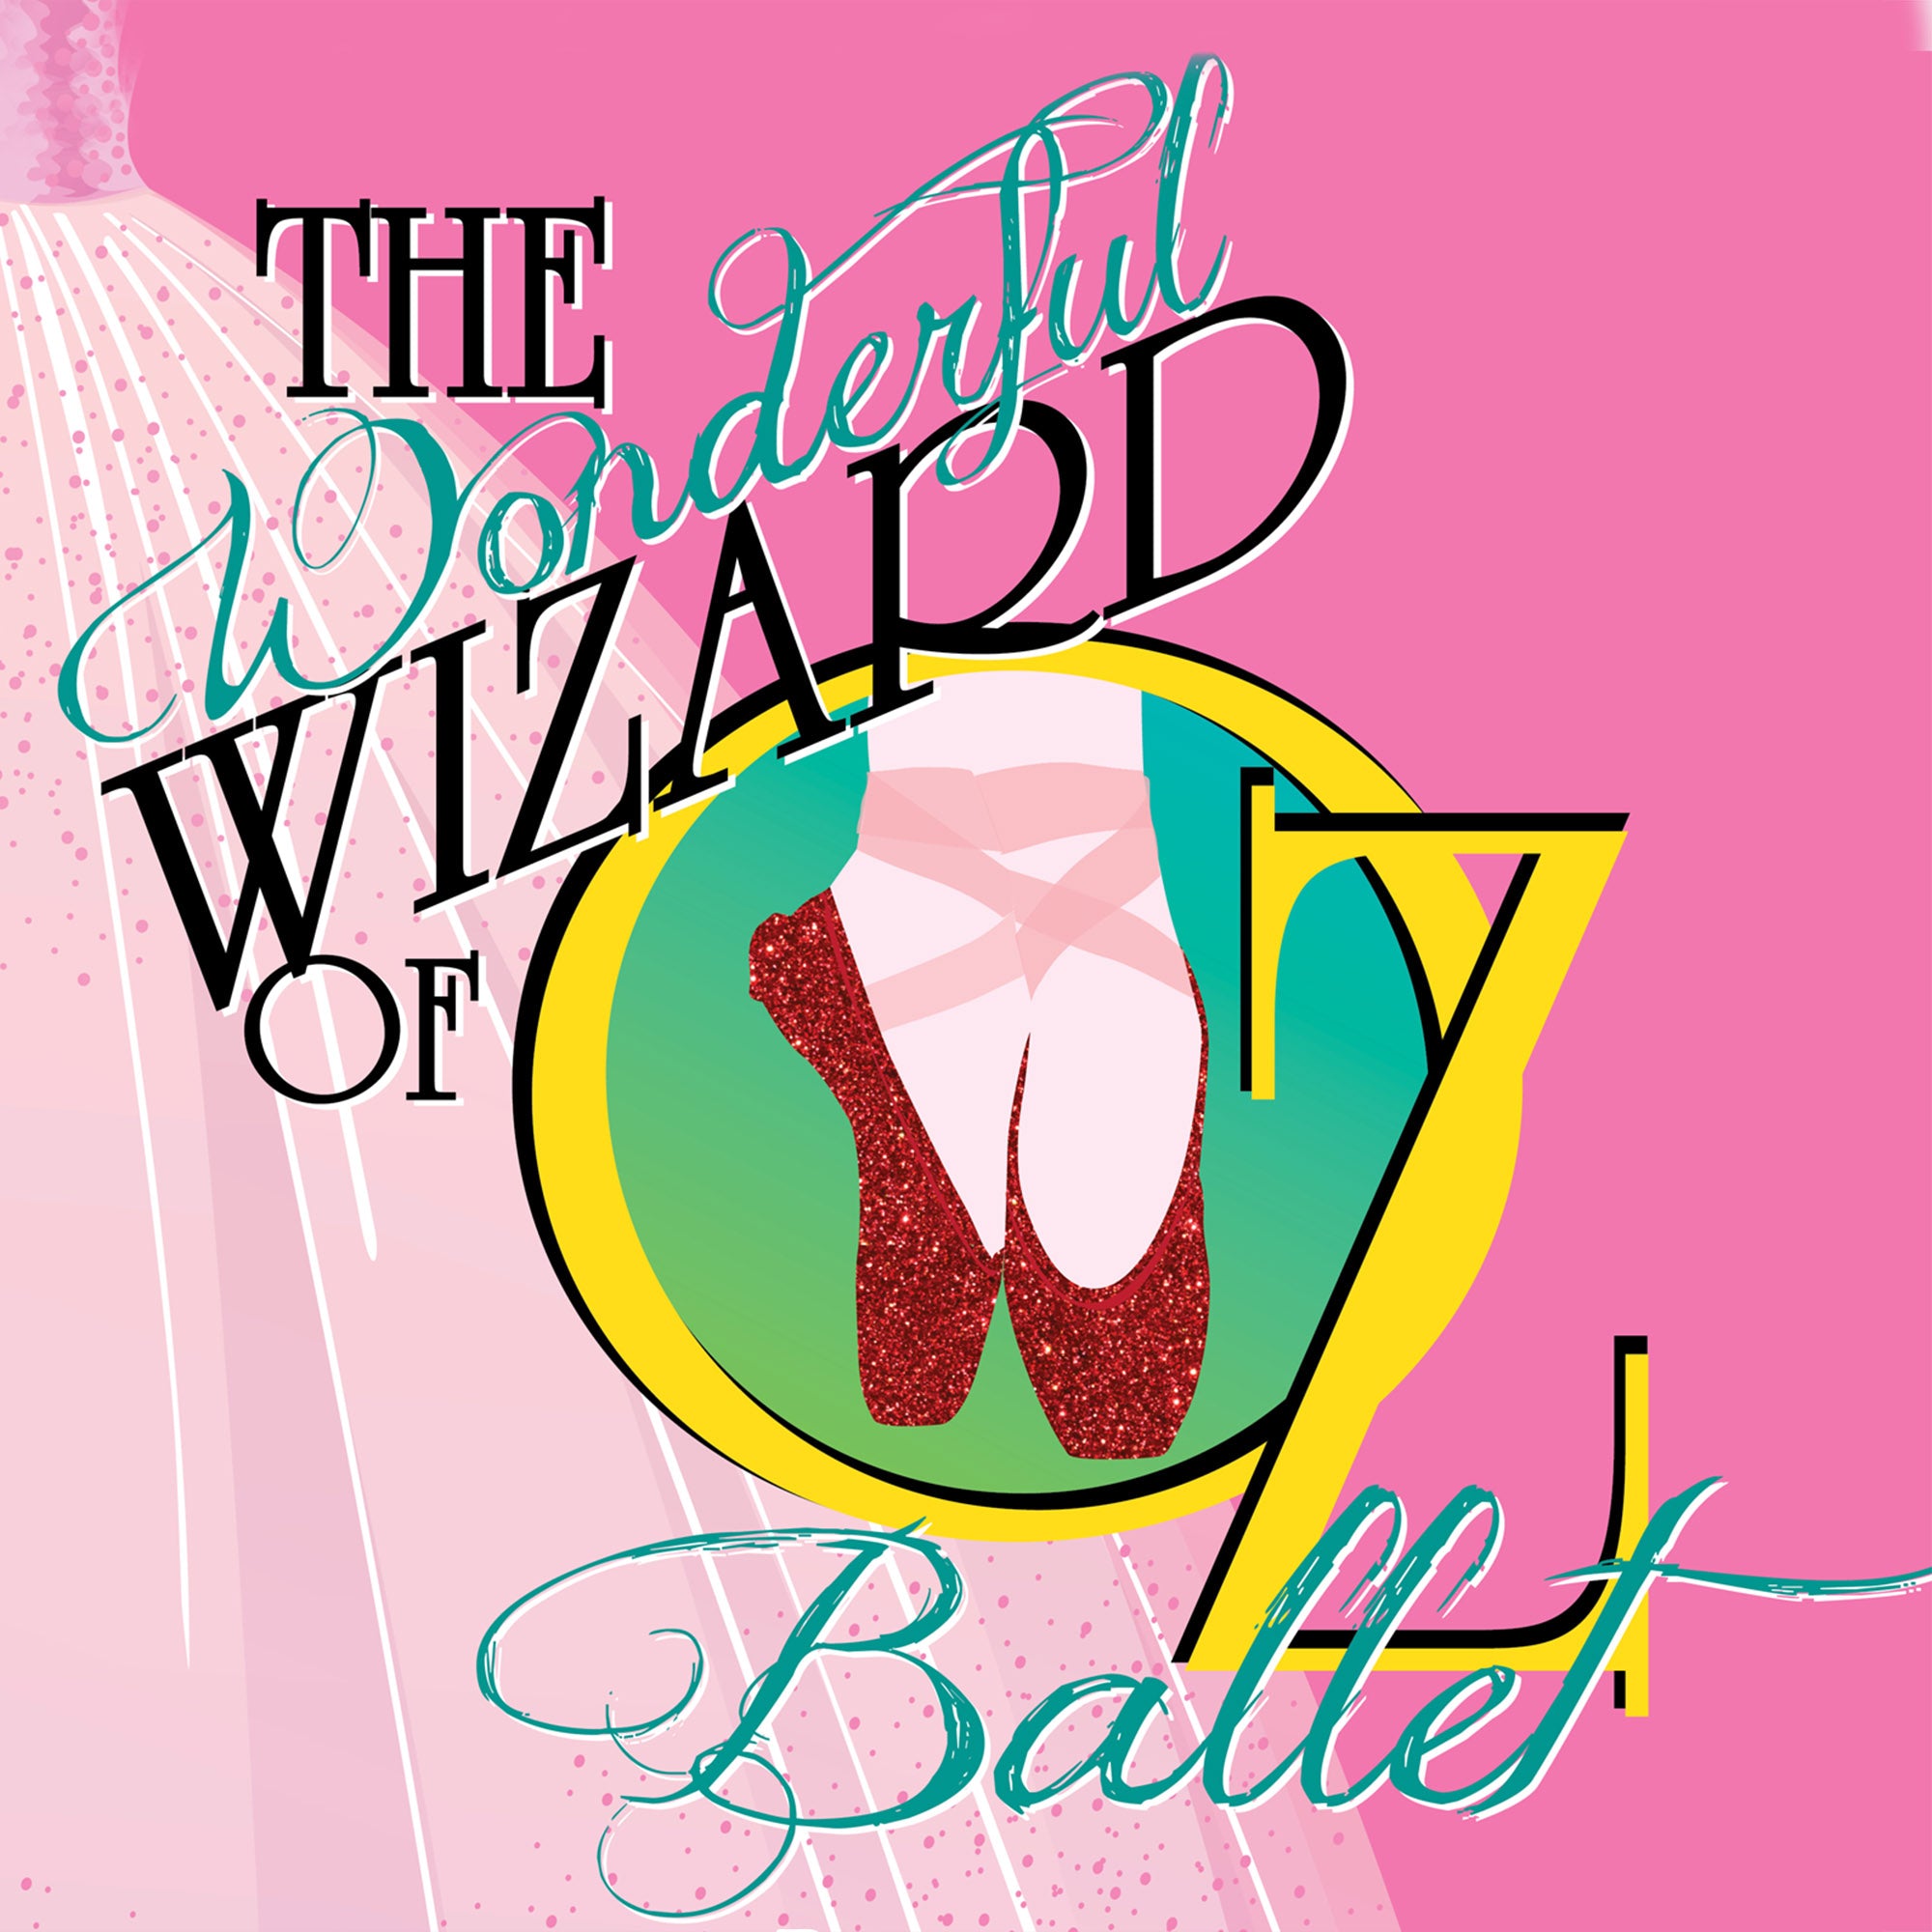 Kristina Pulcini Ballet Academy presents "The Wizard of Oz" 2016 - 2:30 pm Performance - Active Image Media